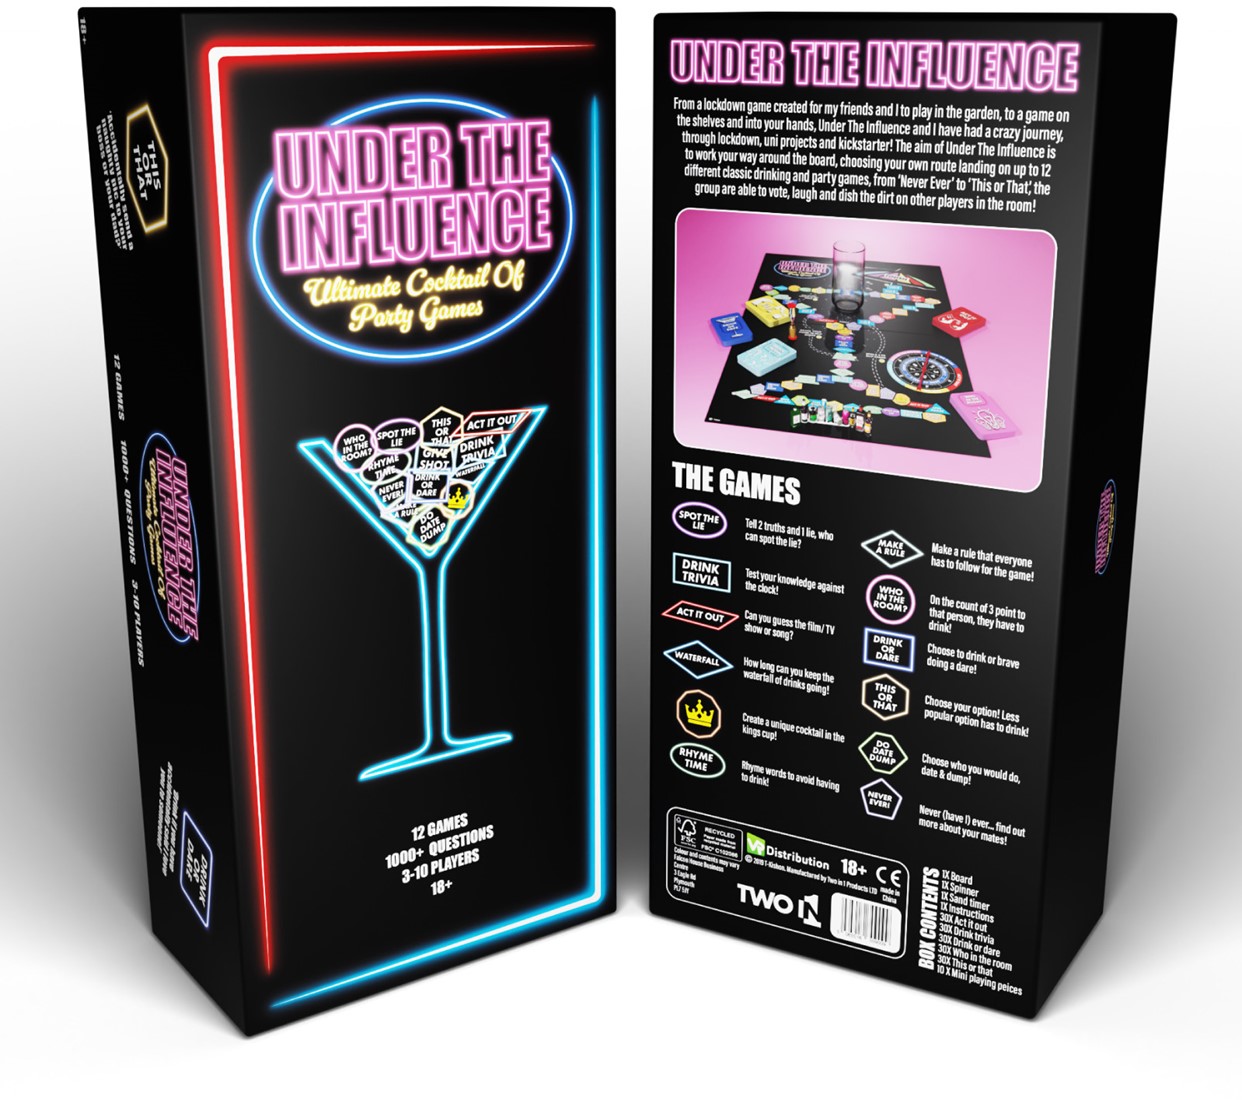 Under The Influence - Party Game (Bordspellen), Two in 1